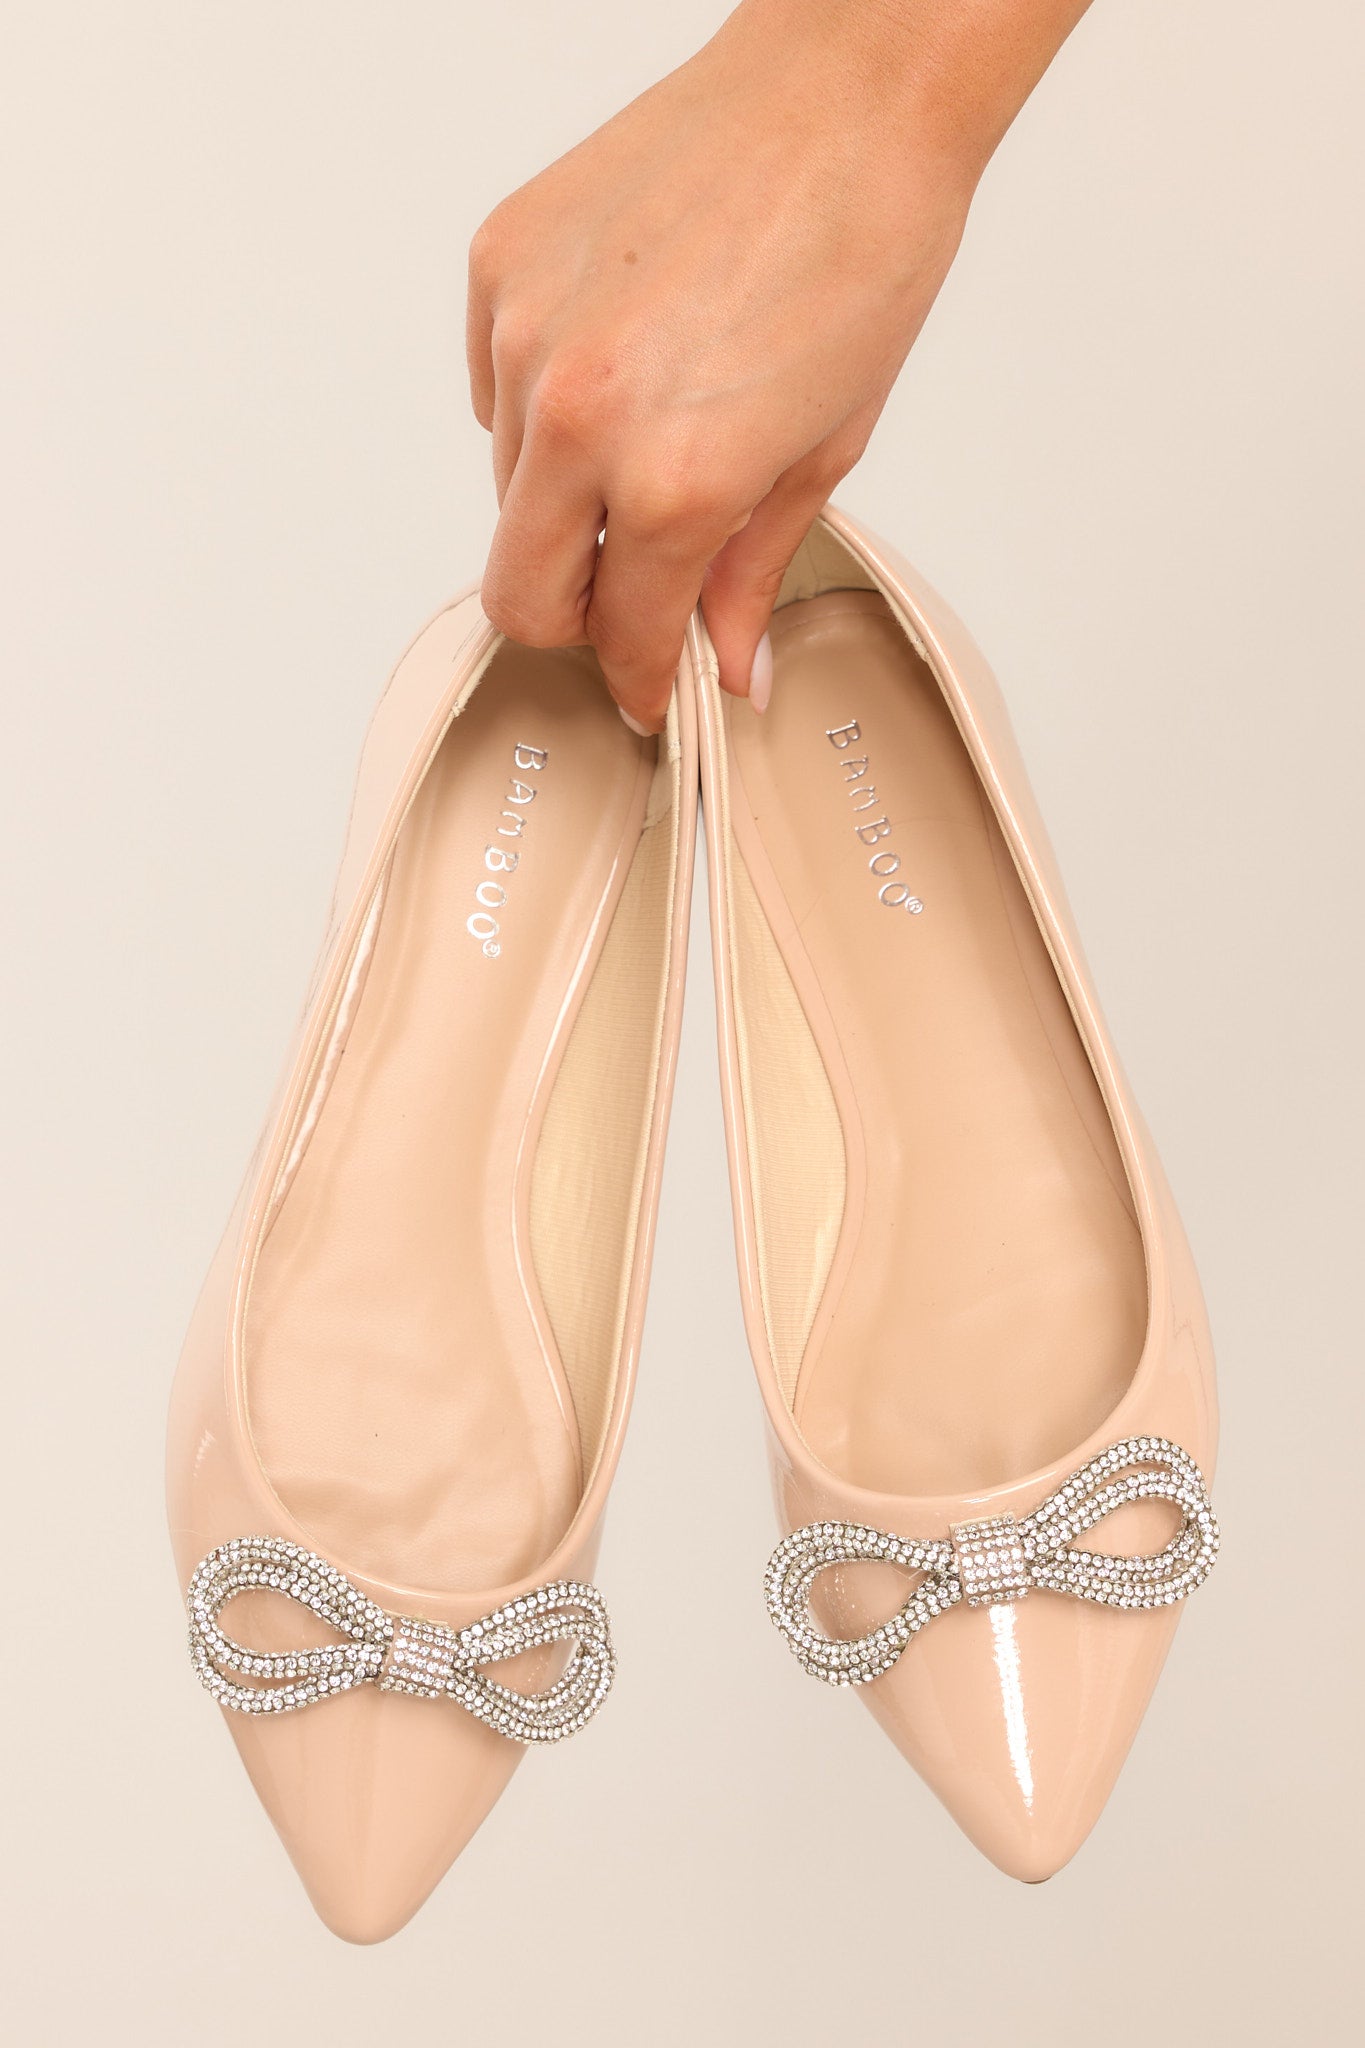 These nude colored flats feature a pointed toe, a rhinestone embellished bow, and a shiny finish. 